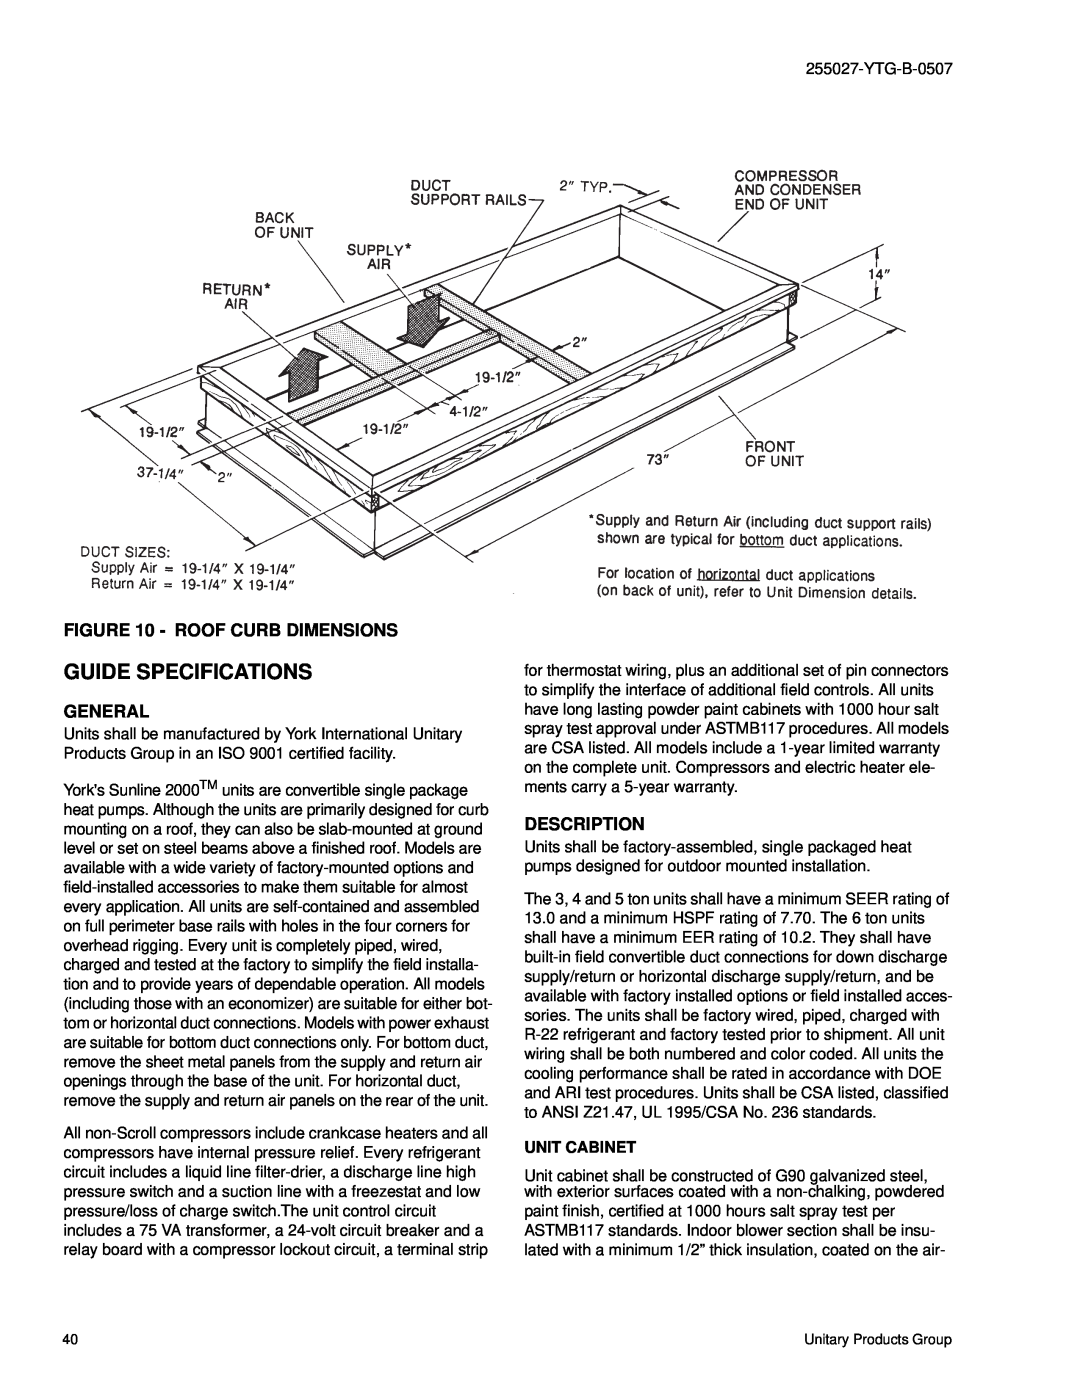 York BP 036 warranty Guide Specifications, Roof Curb Dimensions, General, Description 